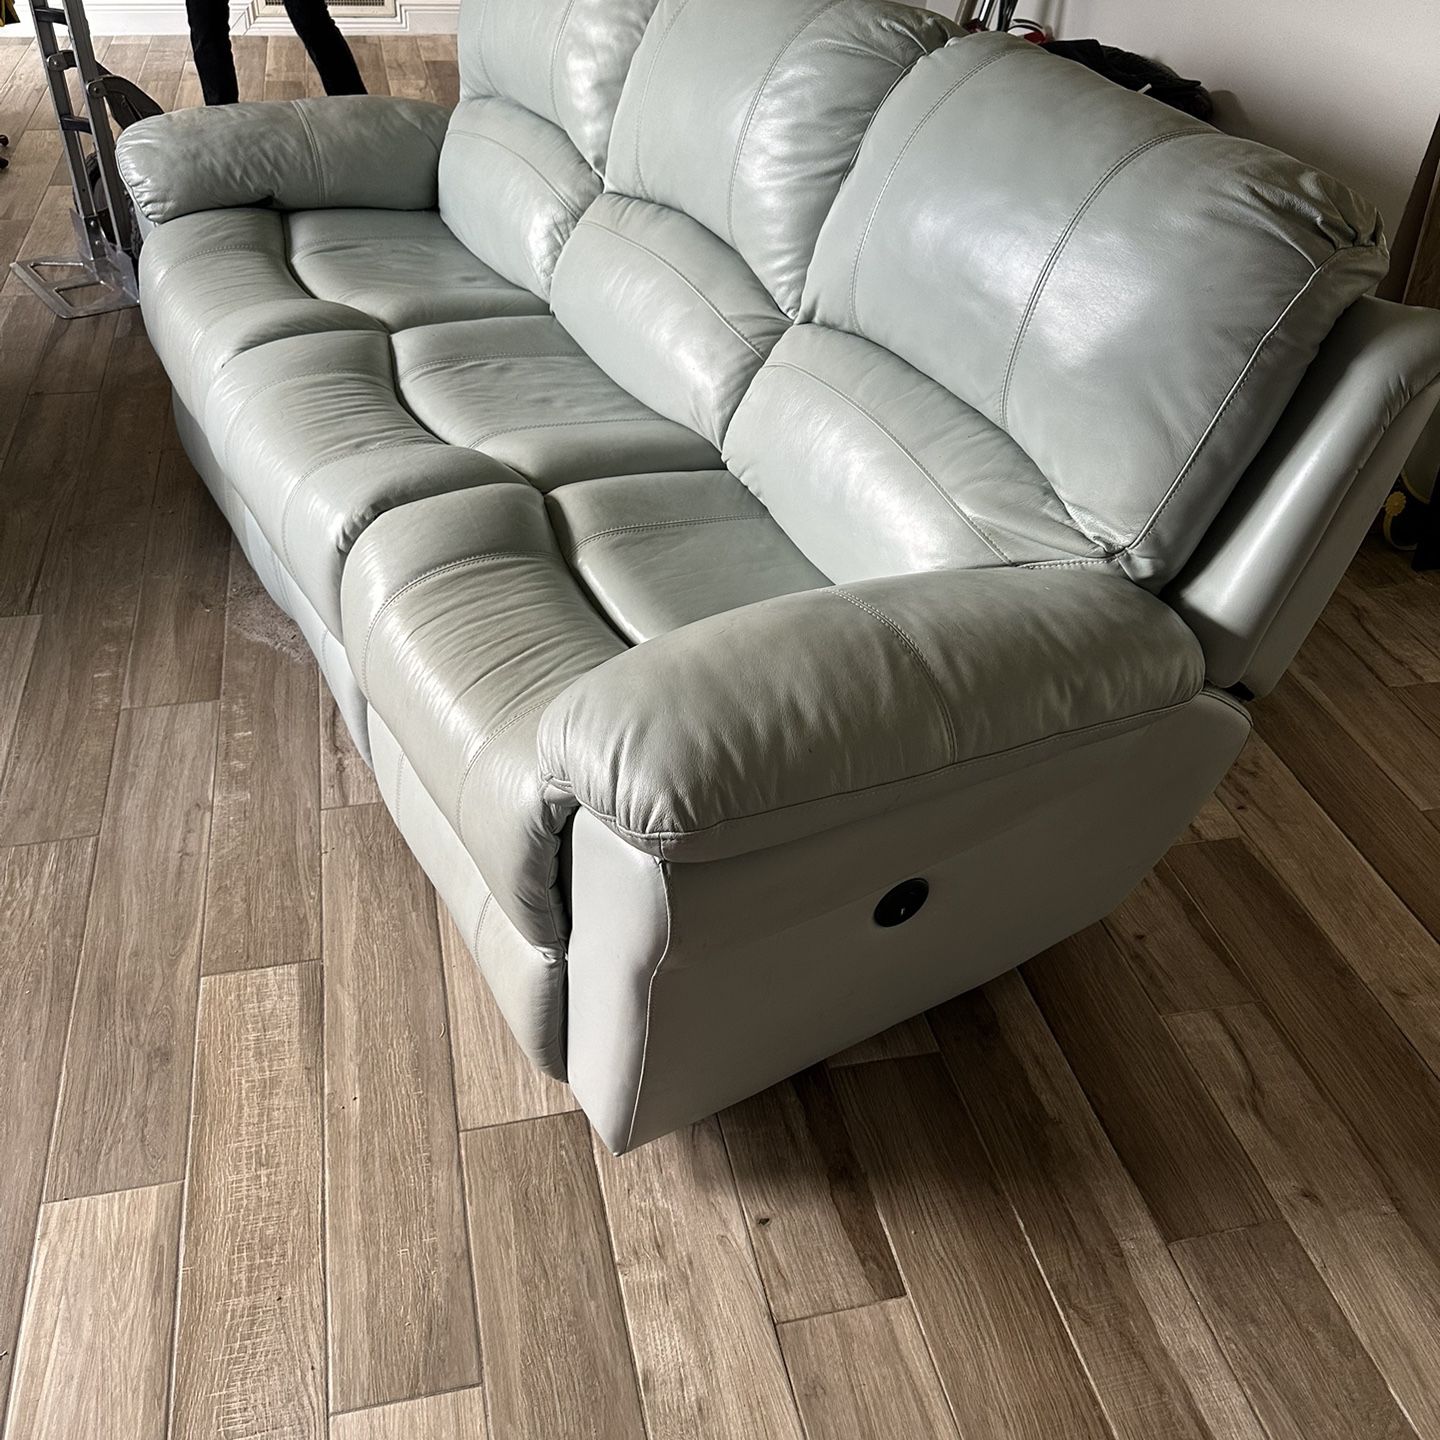 Loveseat & Sofa Recline, Grey Leather "Great condition." We deliver $50 anywhere in PB County (ground floor/driveway) or $100 second floor.